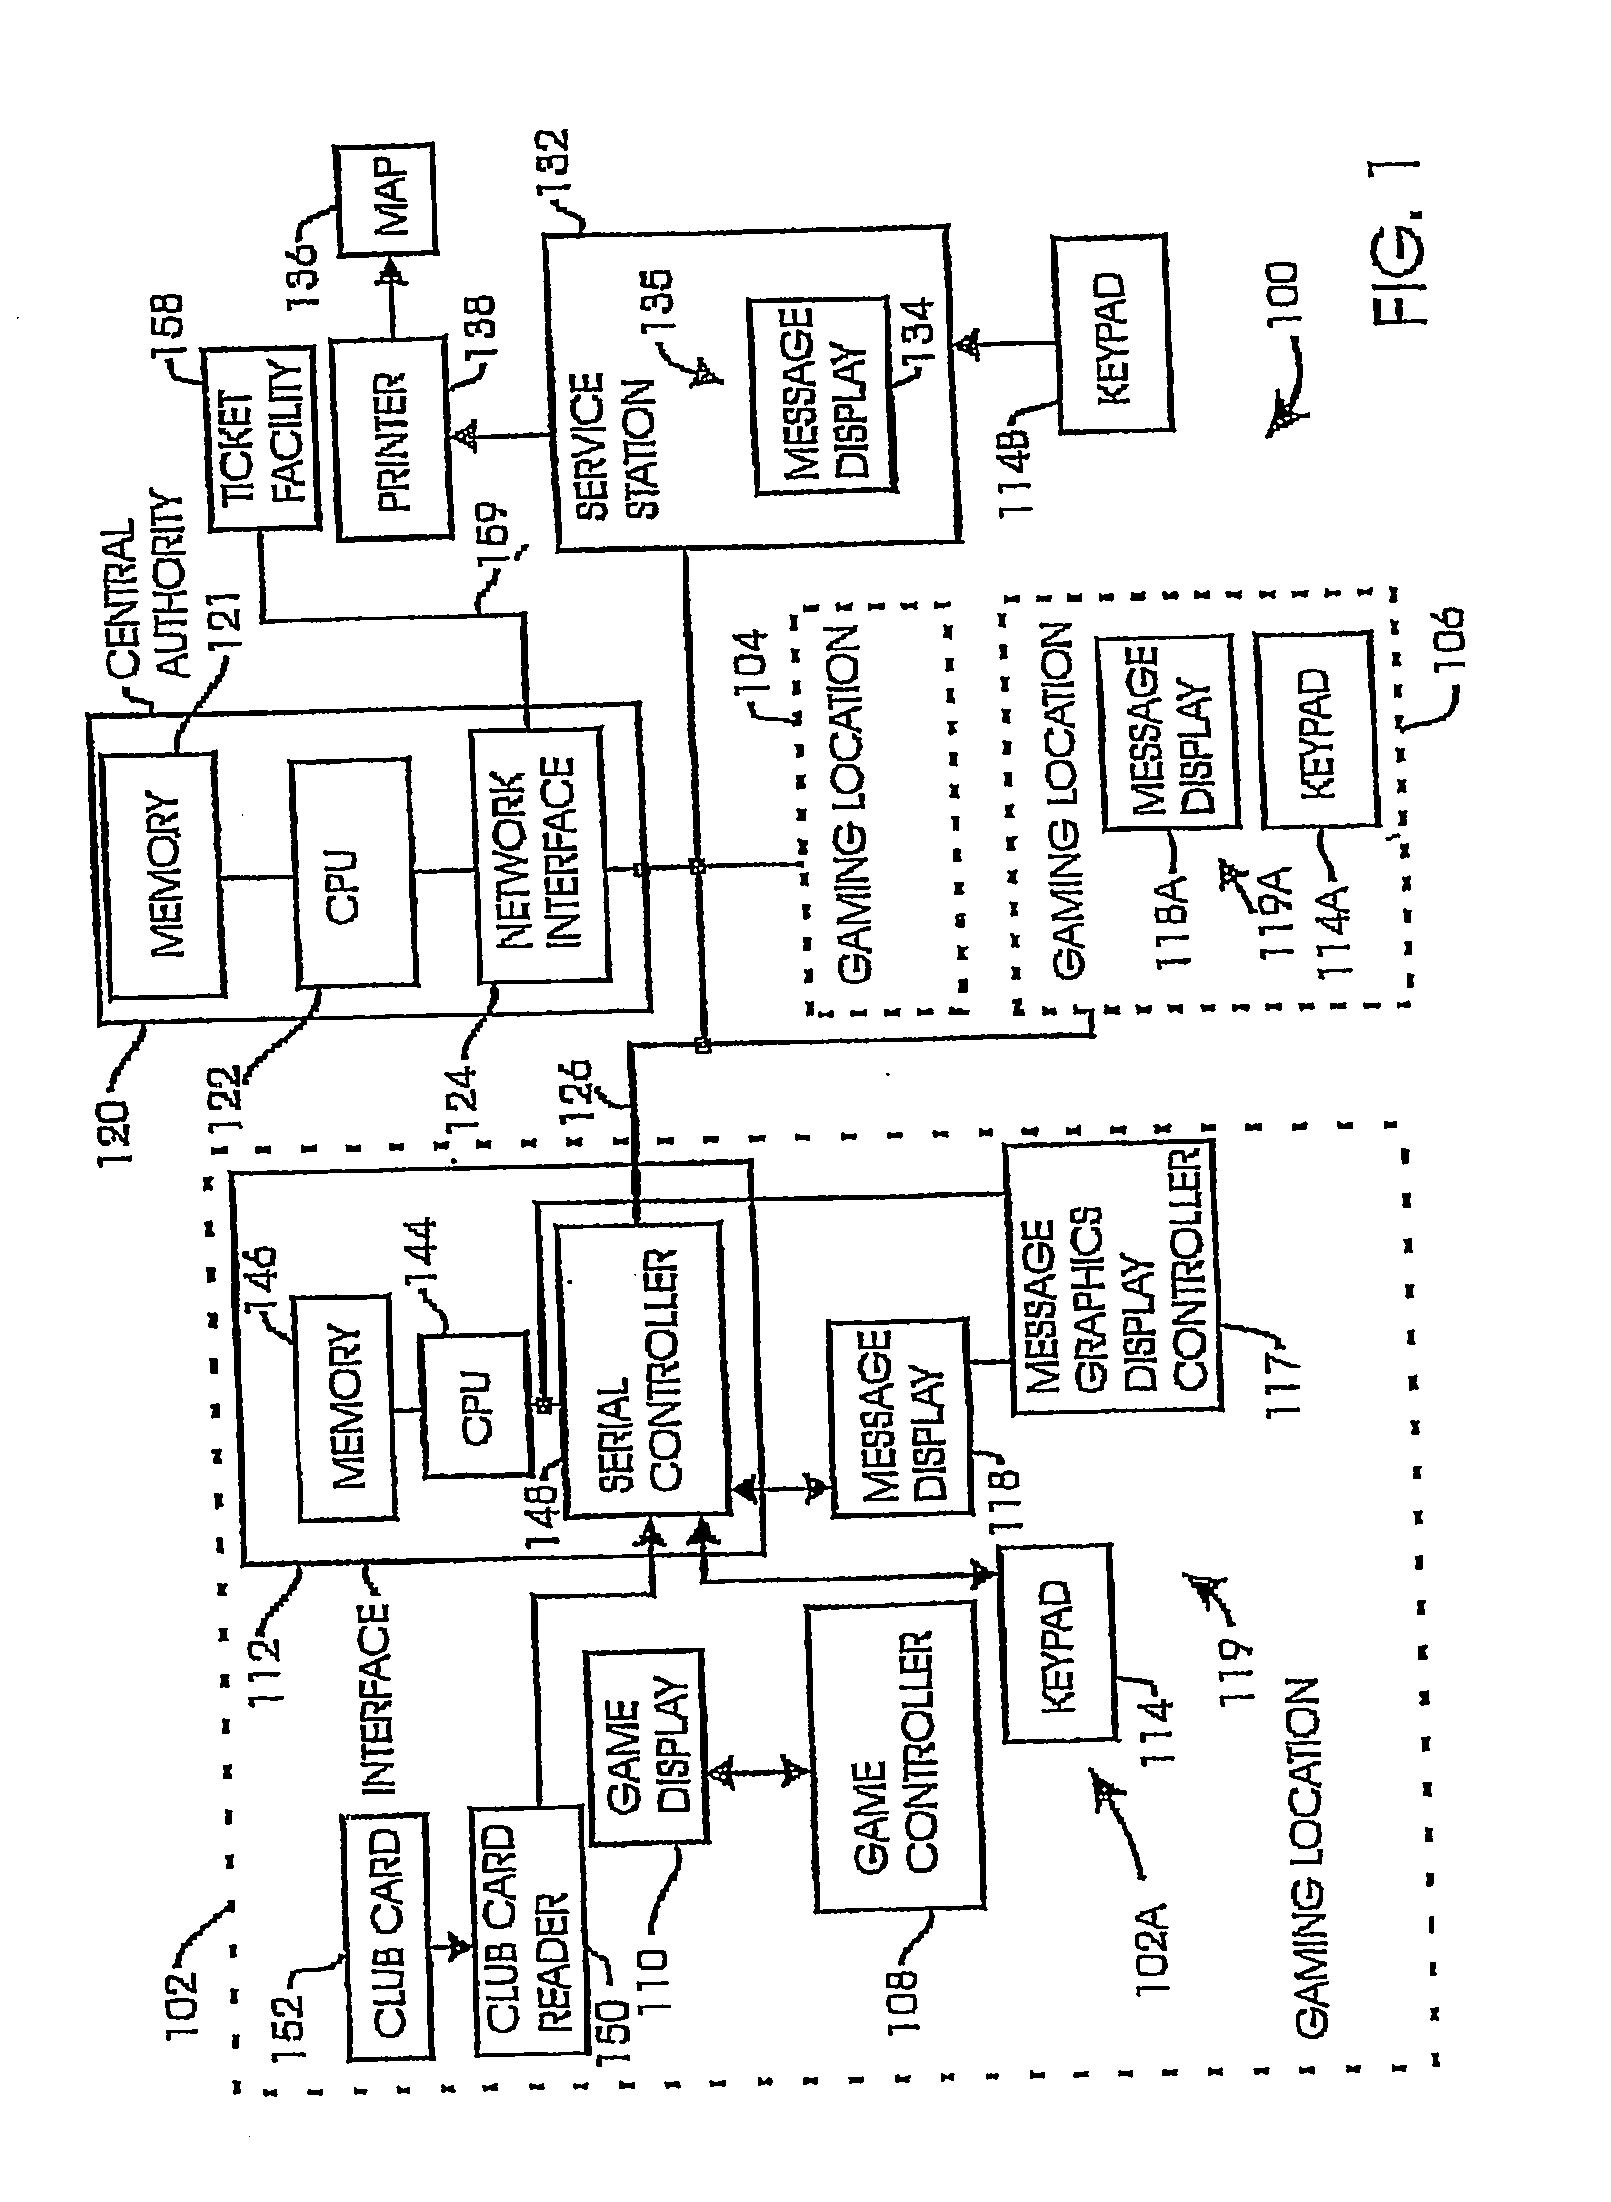 Systems and methods for conducting a sweepstakes in a gaming environment